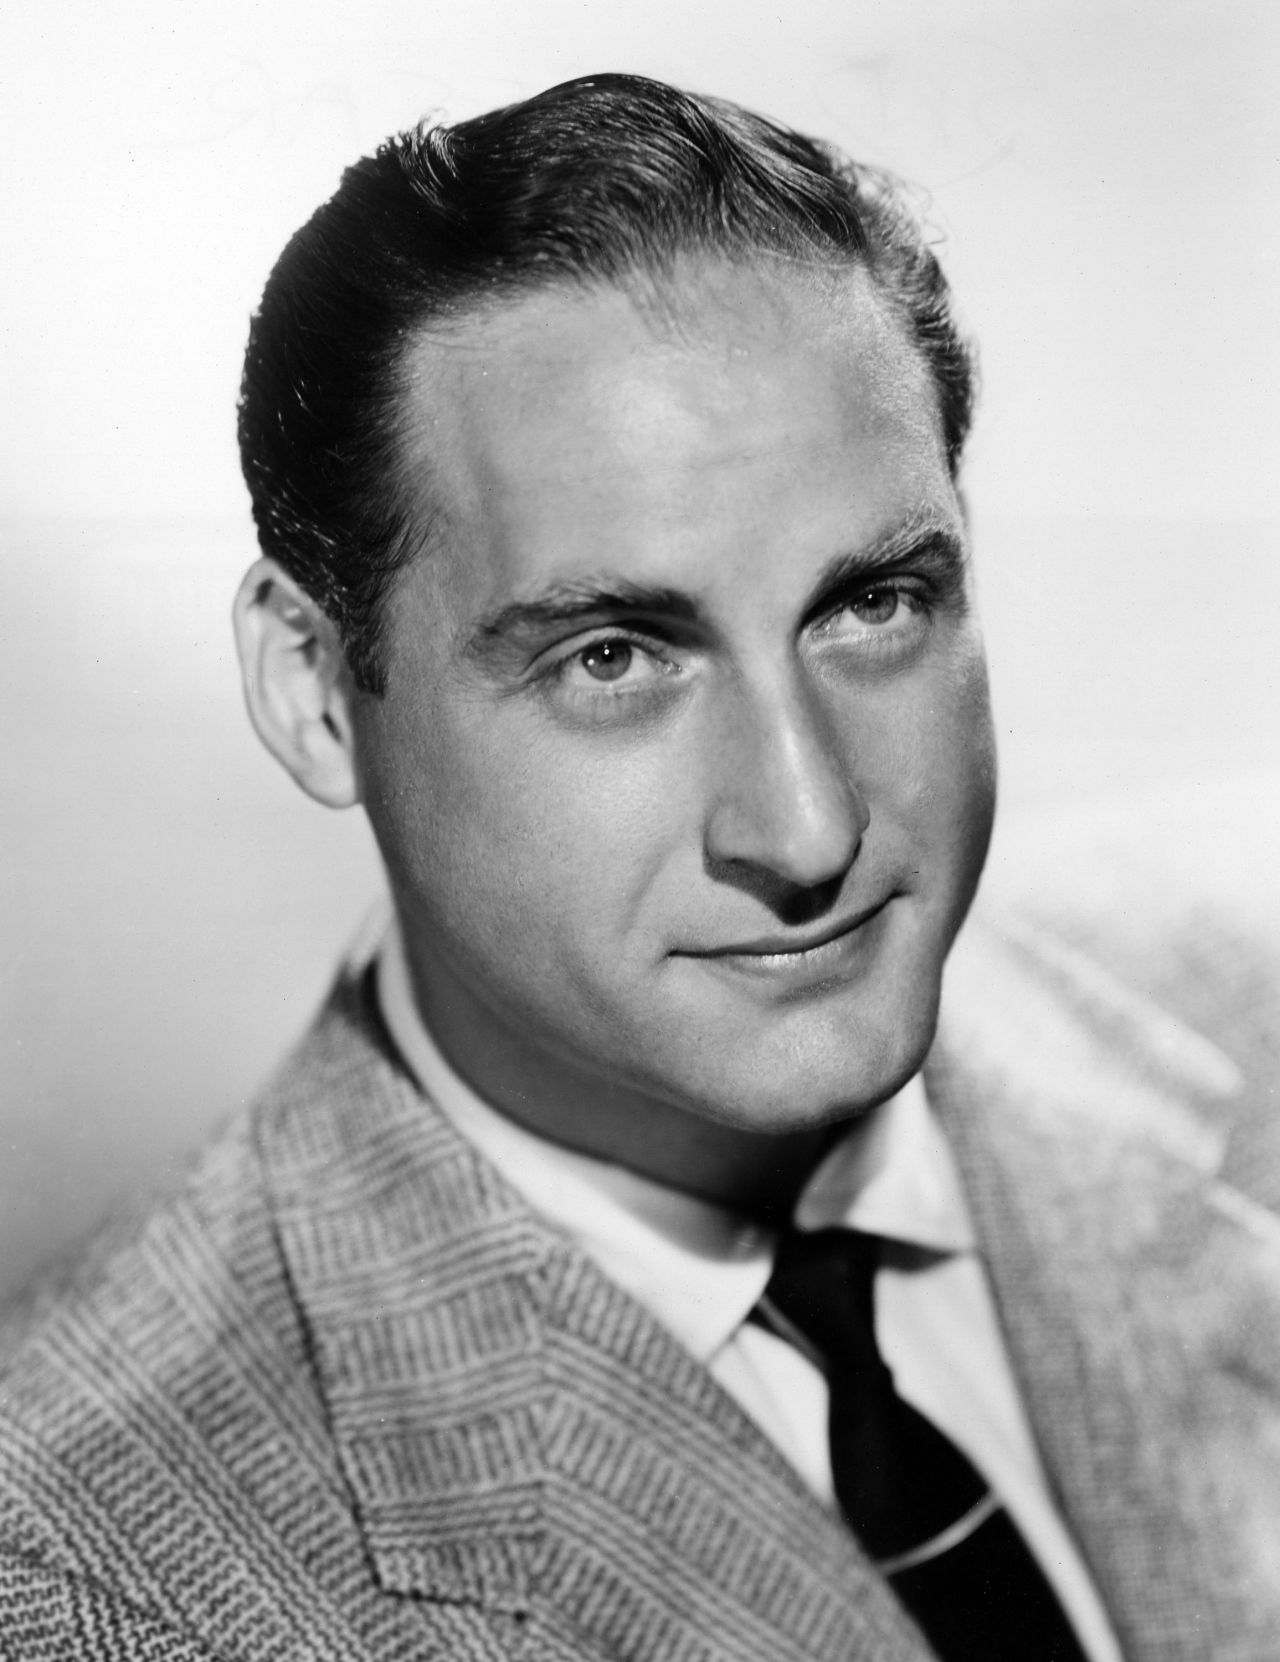 <a href="http://www.cnn.com/2014/02/12/showbiz/sid-caesar-dead/">Sid Caesar</a>, whose clever, anarchic comedy on such programs as "Your Show of Shows" and "Caesar's Hour" helped define the 1950s "Golden Age of Television," died on February 12. He was 91.